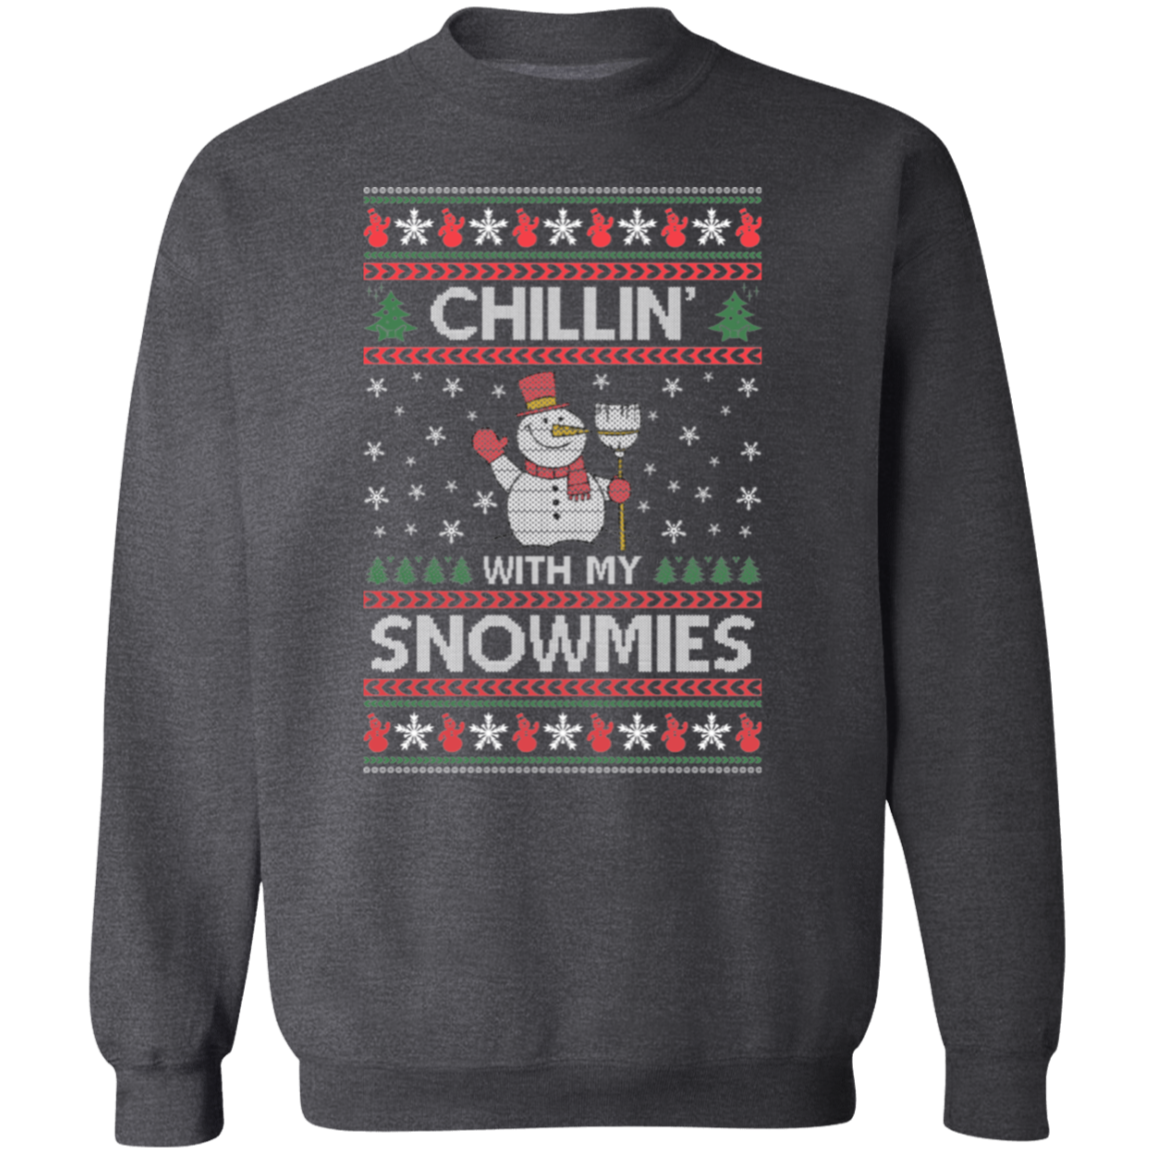 Chilling With My Snowmies - Unisex Ugly Sweater, Christmas, Winter, Fall